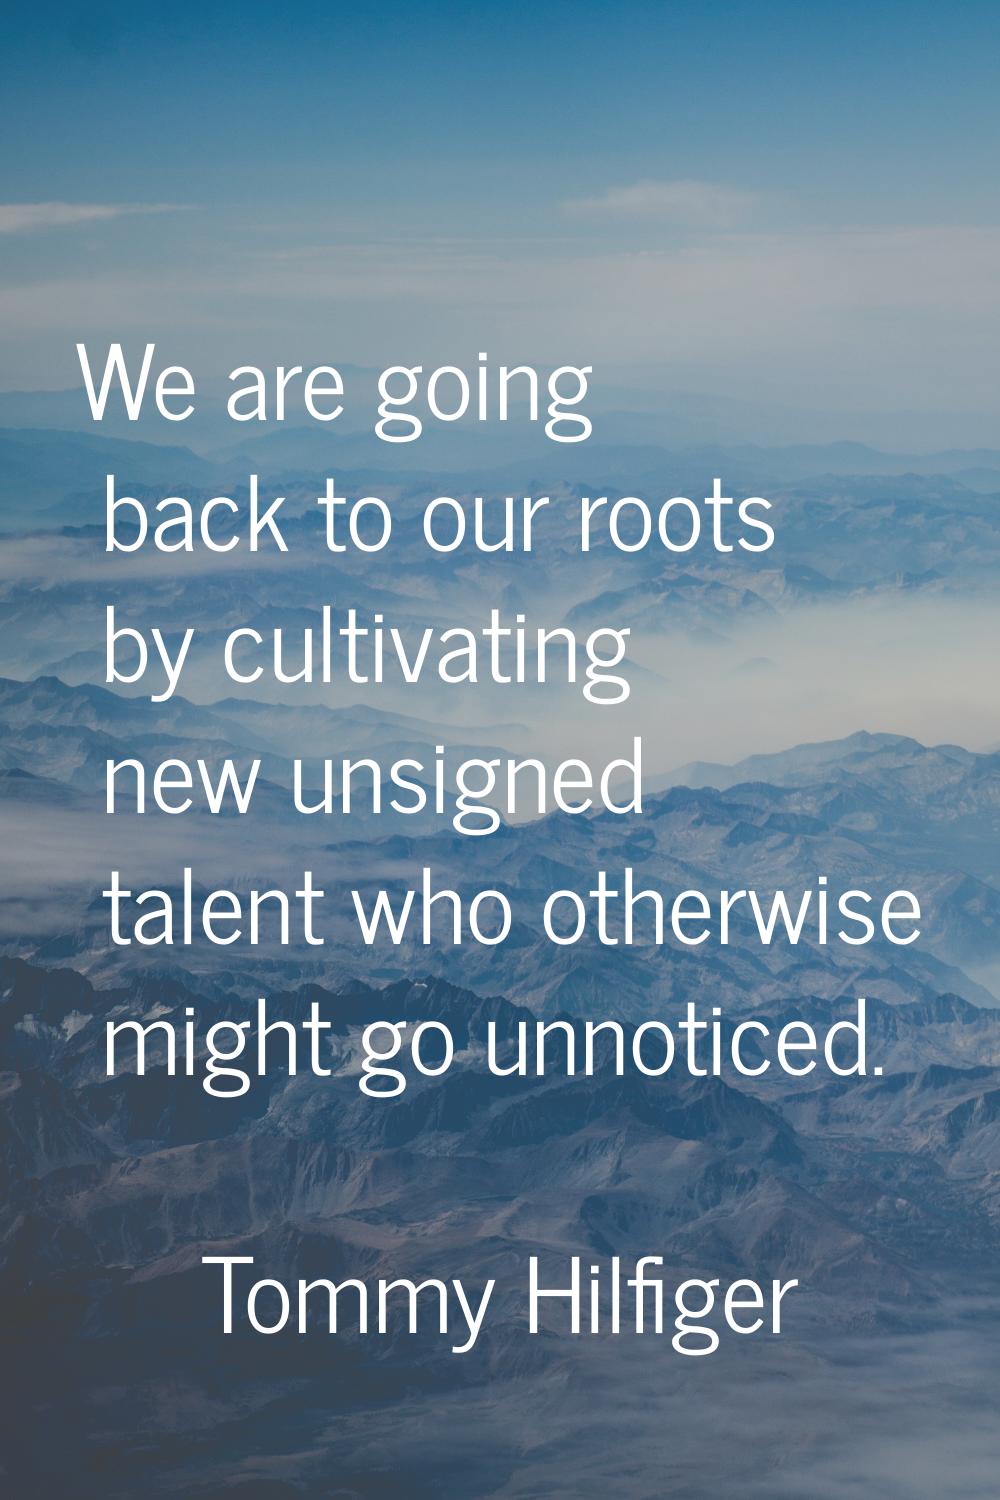 We are going back to our roots by cultivating new unsigned talent who otherwise might go unnoticed.